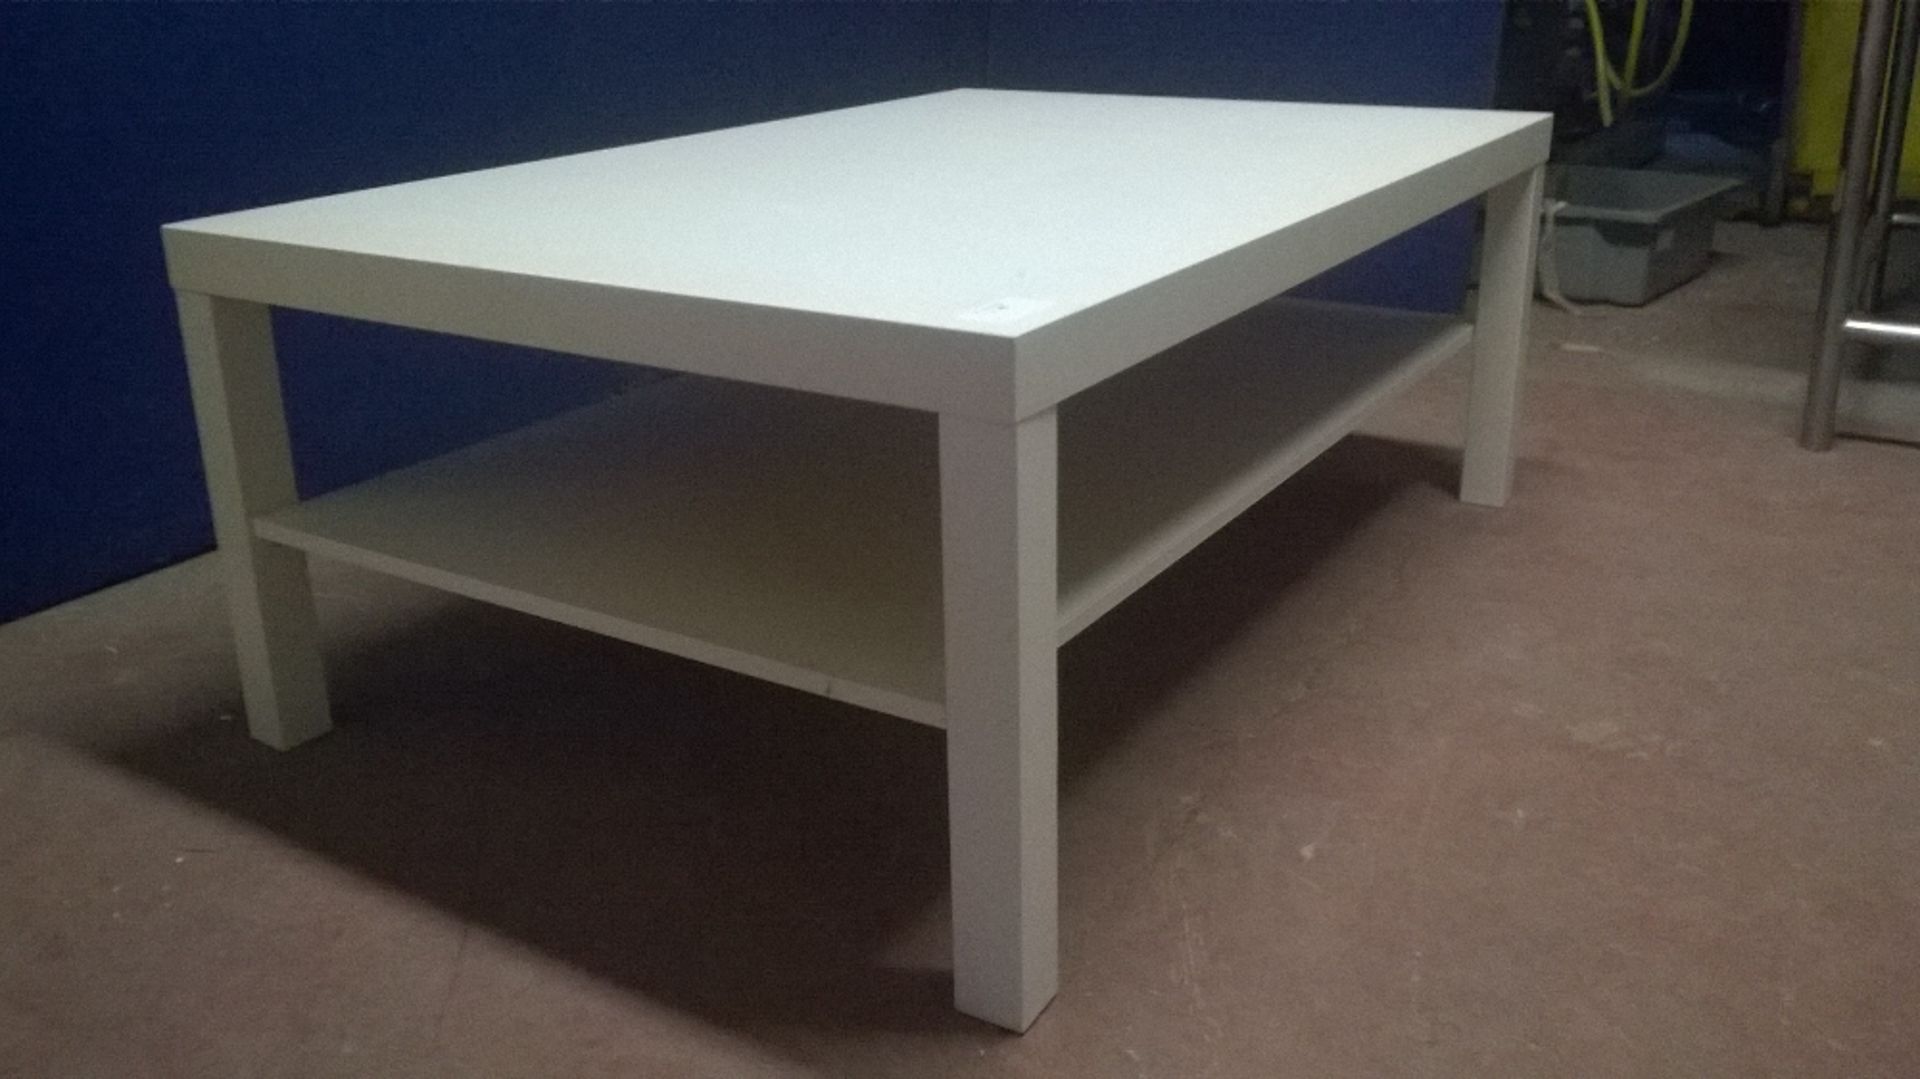 Ikea 'Lack' Low Level Coffee Table - Image 3 of 4